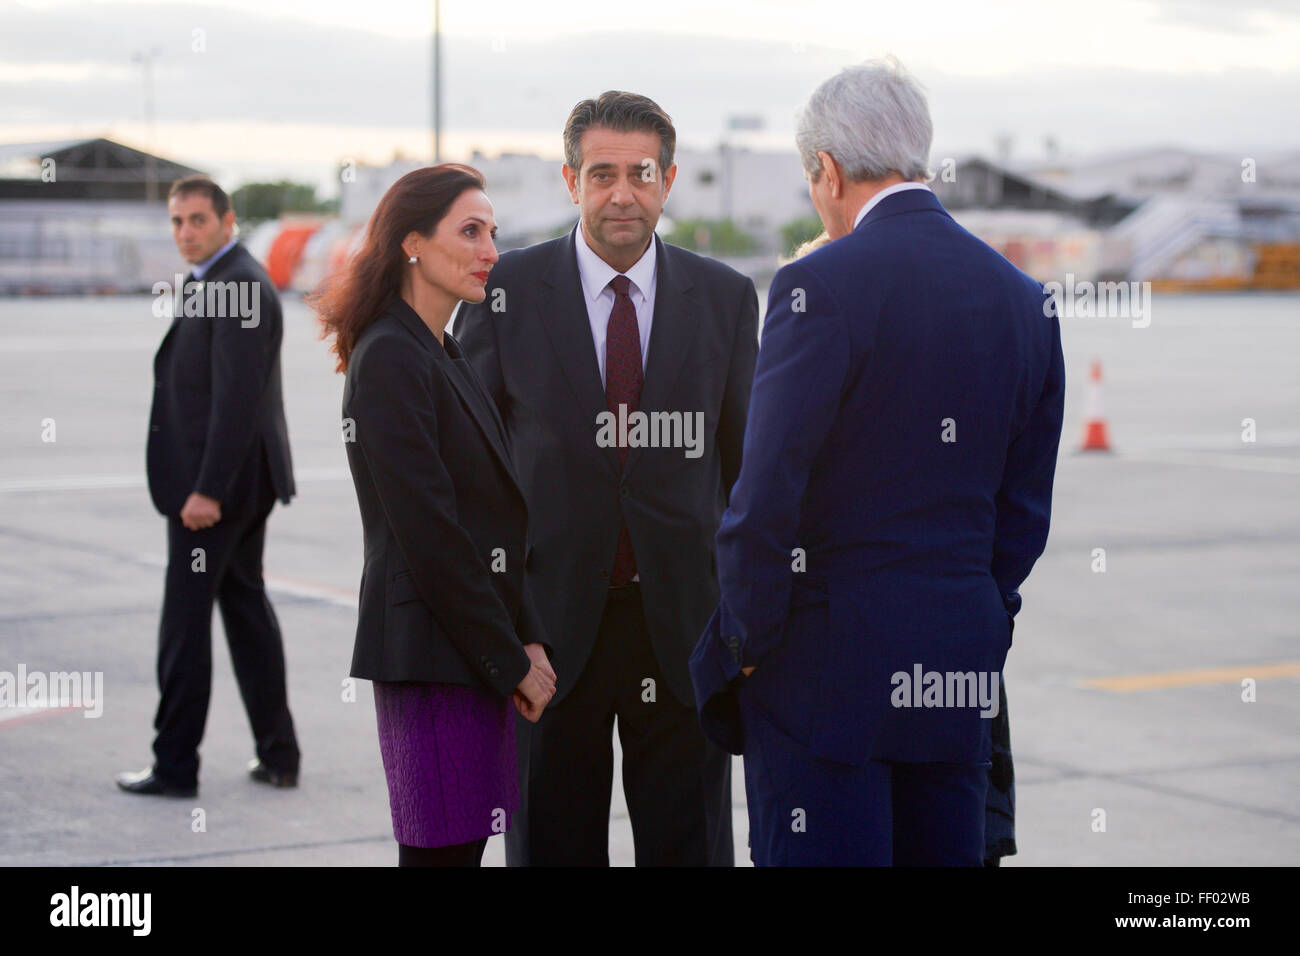 Secretary Kerry Chats With Cypriot Ministry of Foreign Affairs Chief of Protocol Kountourides and His Colleague Upon Arrival in Cyprus Stock Photo